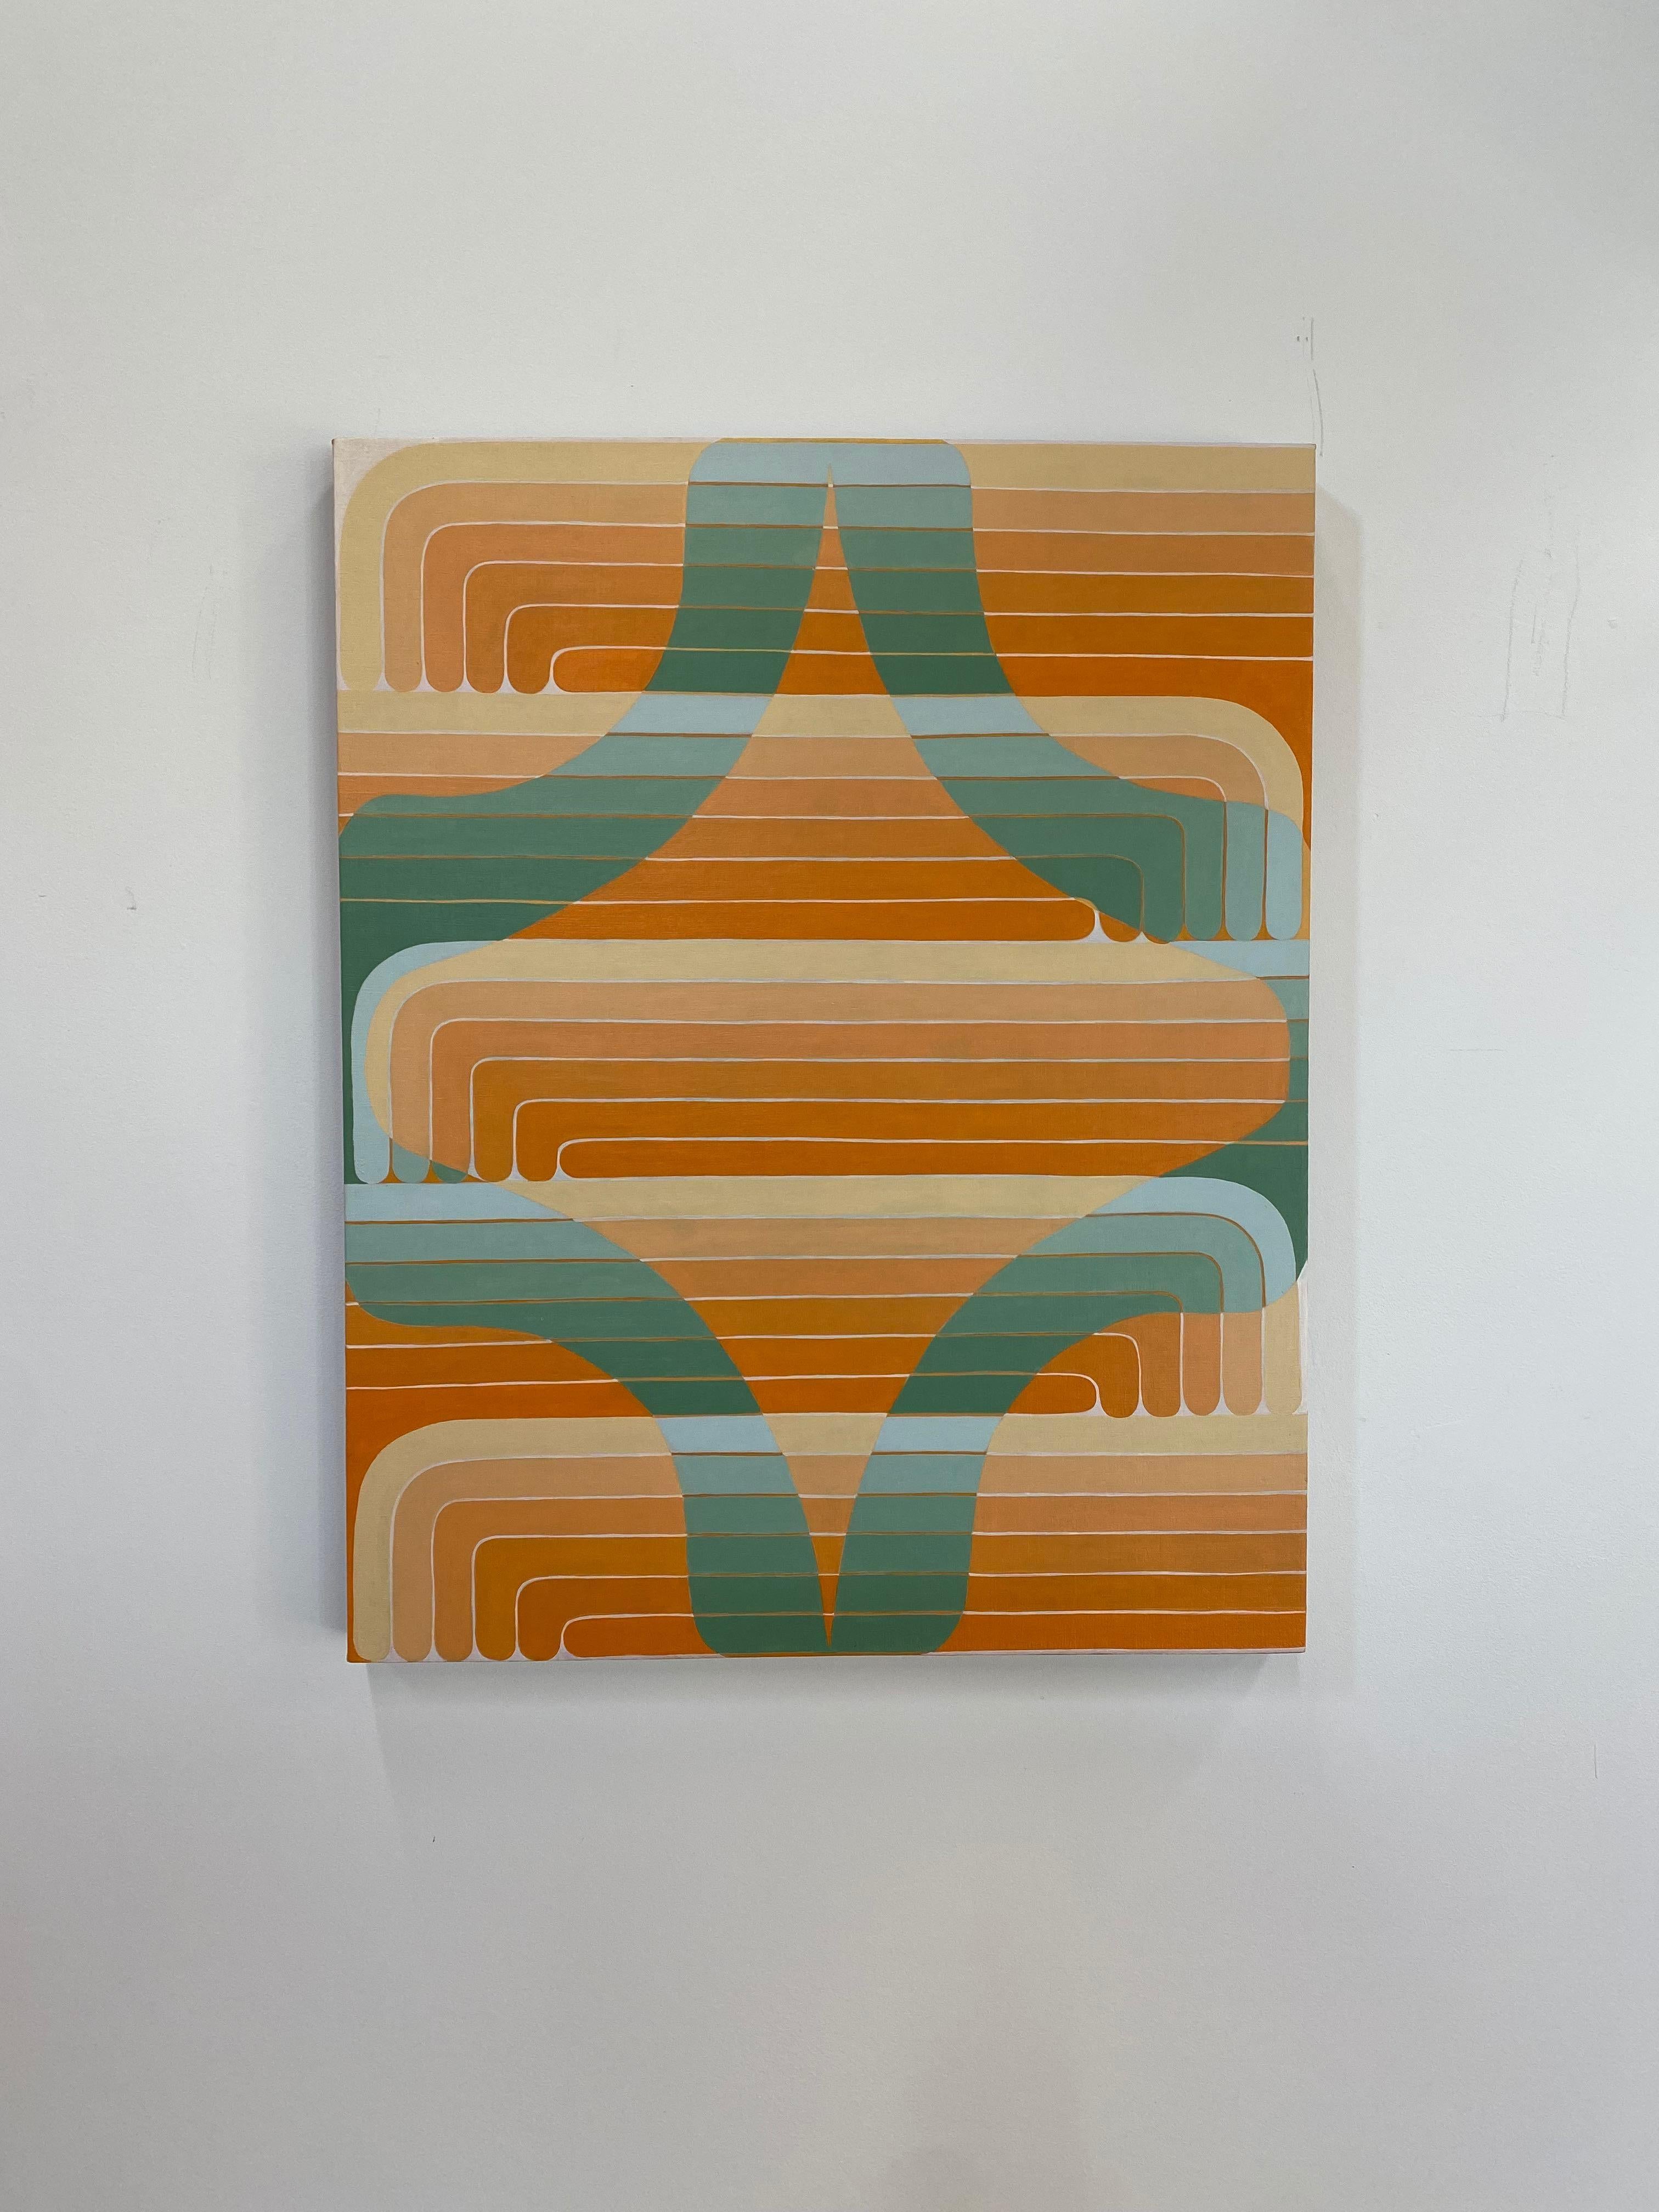 Geometric shapes compose a pattern of curving lines in shades of orange and soft safe green, bright and luminous against a light gray background, suggesting a sense of movement within the layered forms. Signed and dated on verso.

Jenny Kemp’s